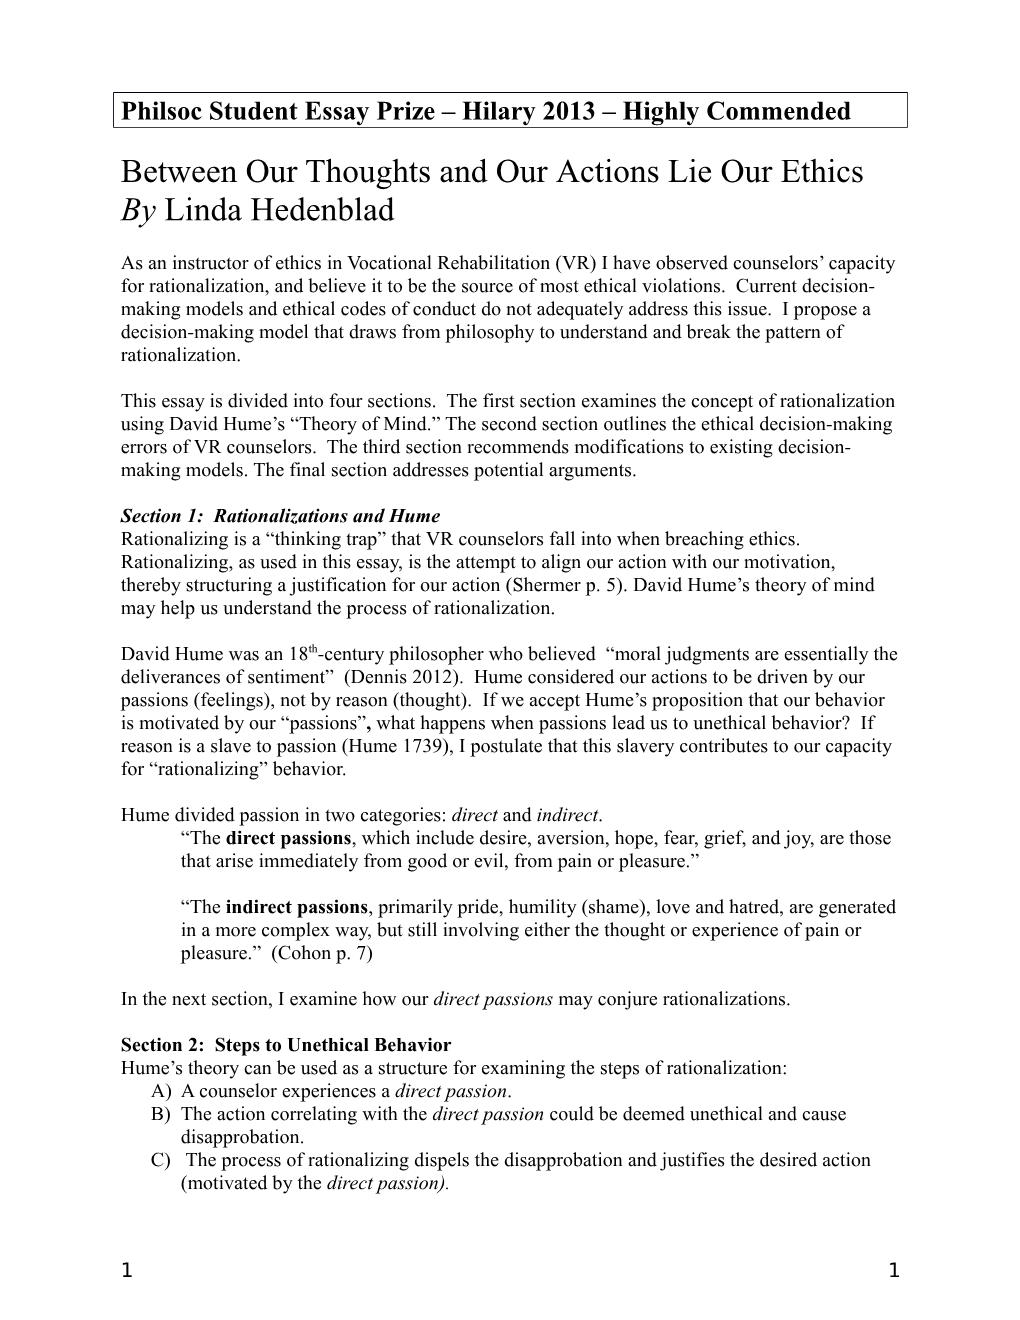 Between Our Thoughts and Our Actions Lie Our Ethics by Linda Hedenblad